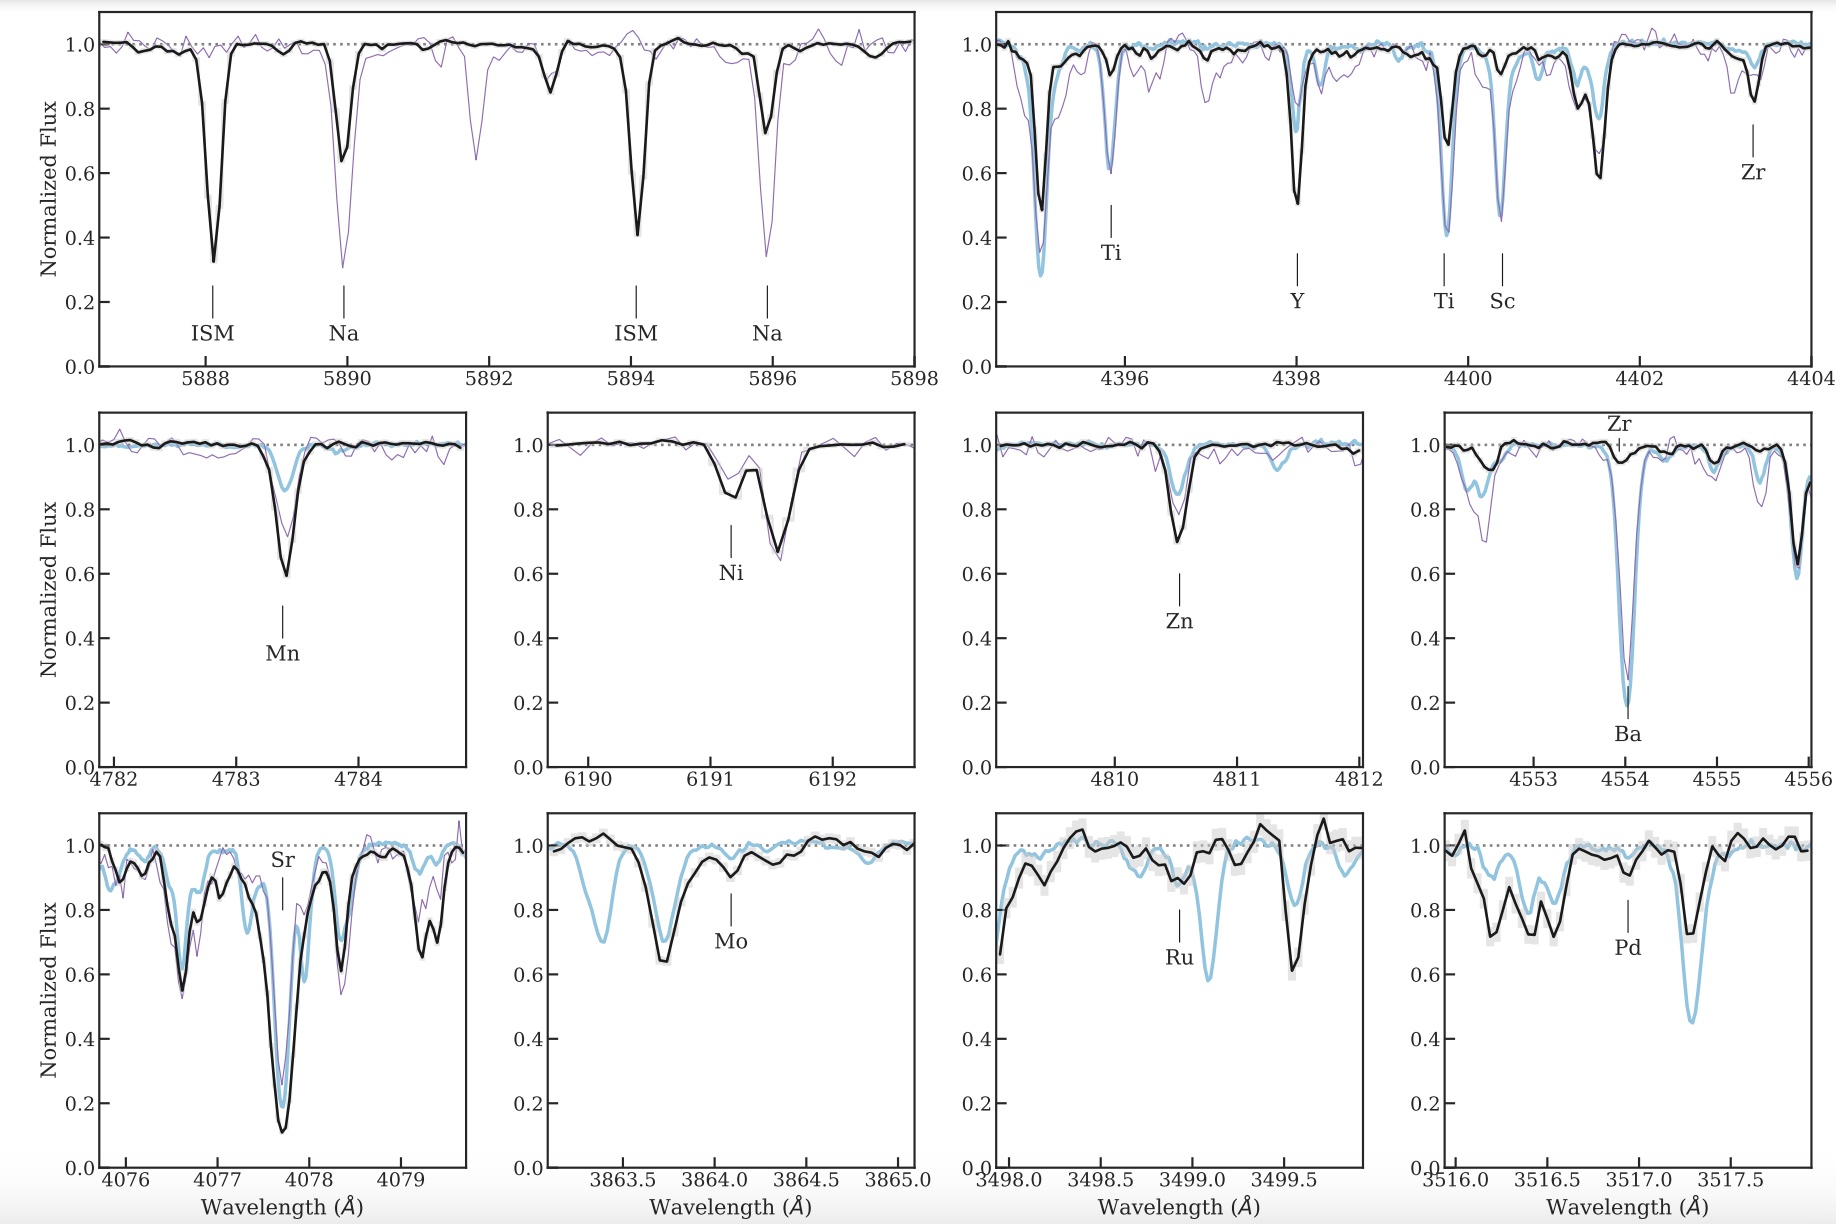 A series of graphs showing the weirdest star data in the Milky Way.